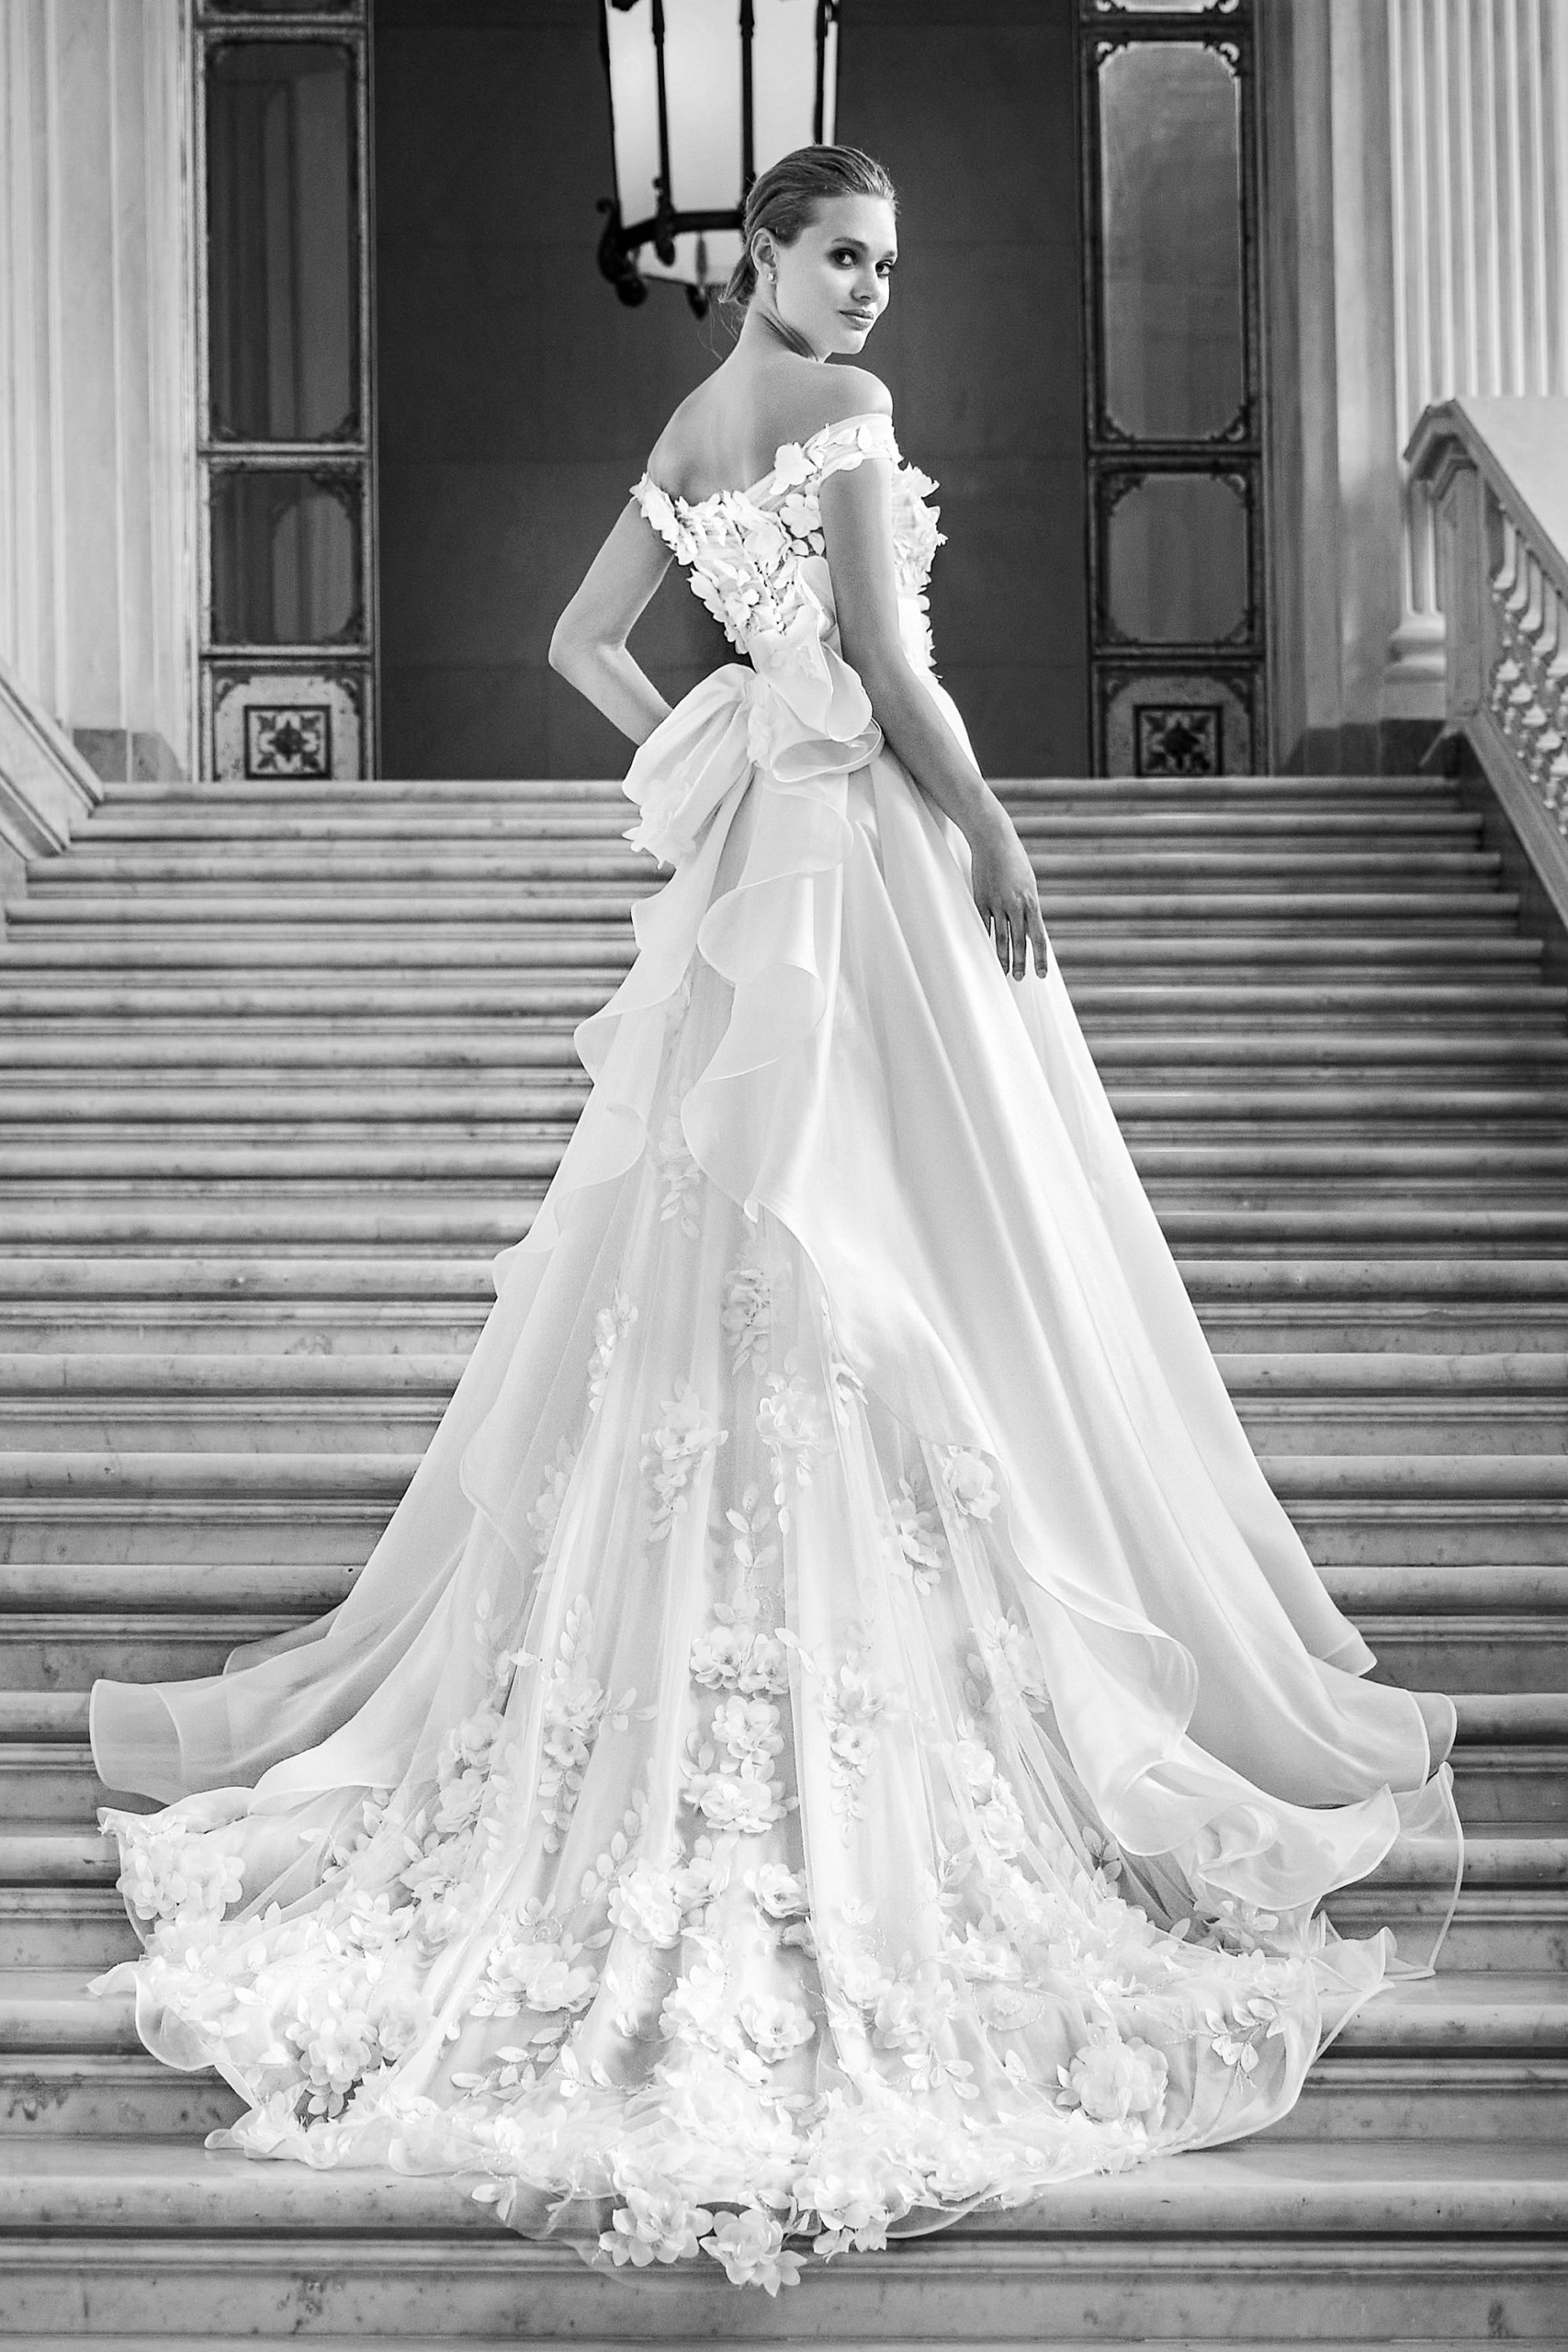 Corigliano Calabro Wedding Dresses: Exclusivity, Class and Elegance in Vogue Style - Quality and Beauty Made in Italy Meets Style for a Fabulous Wedding